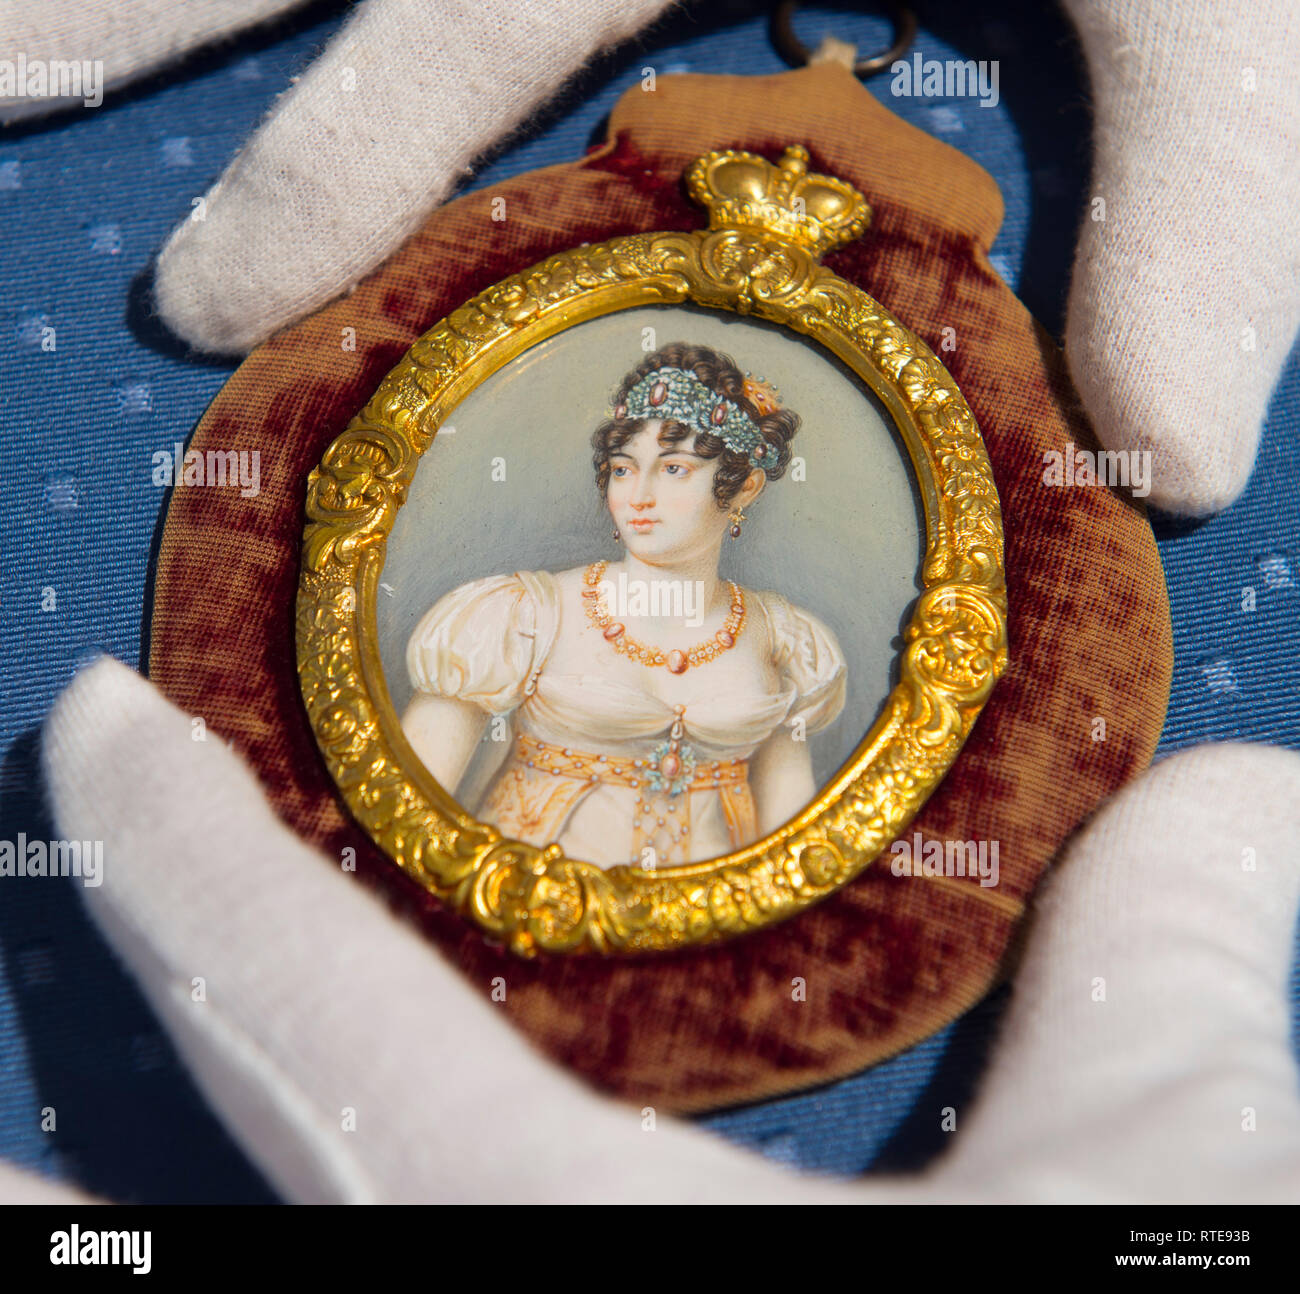 Bonhams, Knightsbridge, London, UK. 1 March, 2019. Private collection and Gallery of Alain Morvan Antiquitäten previewed before their sale at Bonhams on 6 March. Image: Portrait miniature, sister of Napoleon. Credit: Malcolm Park/Alamy Live News. Stock Photo